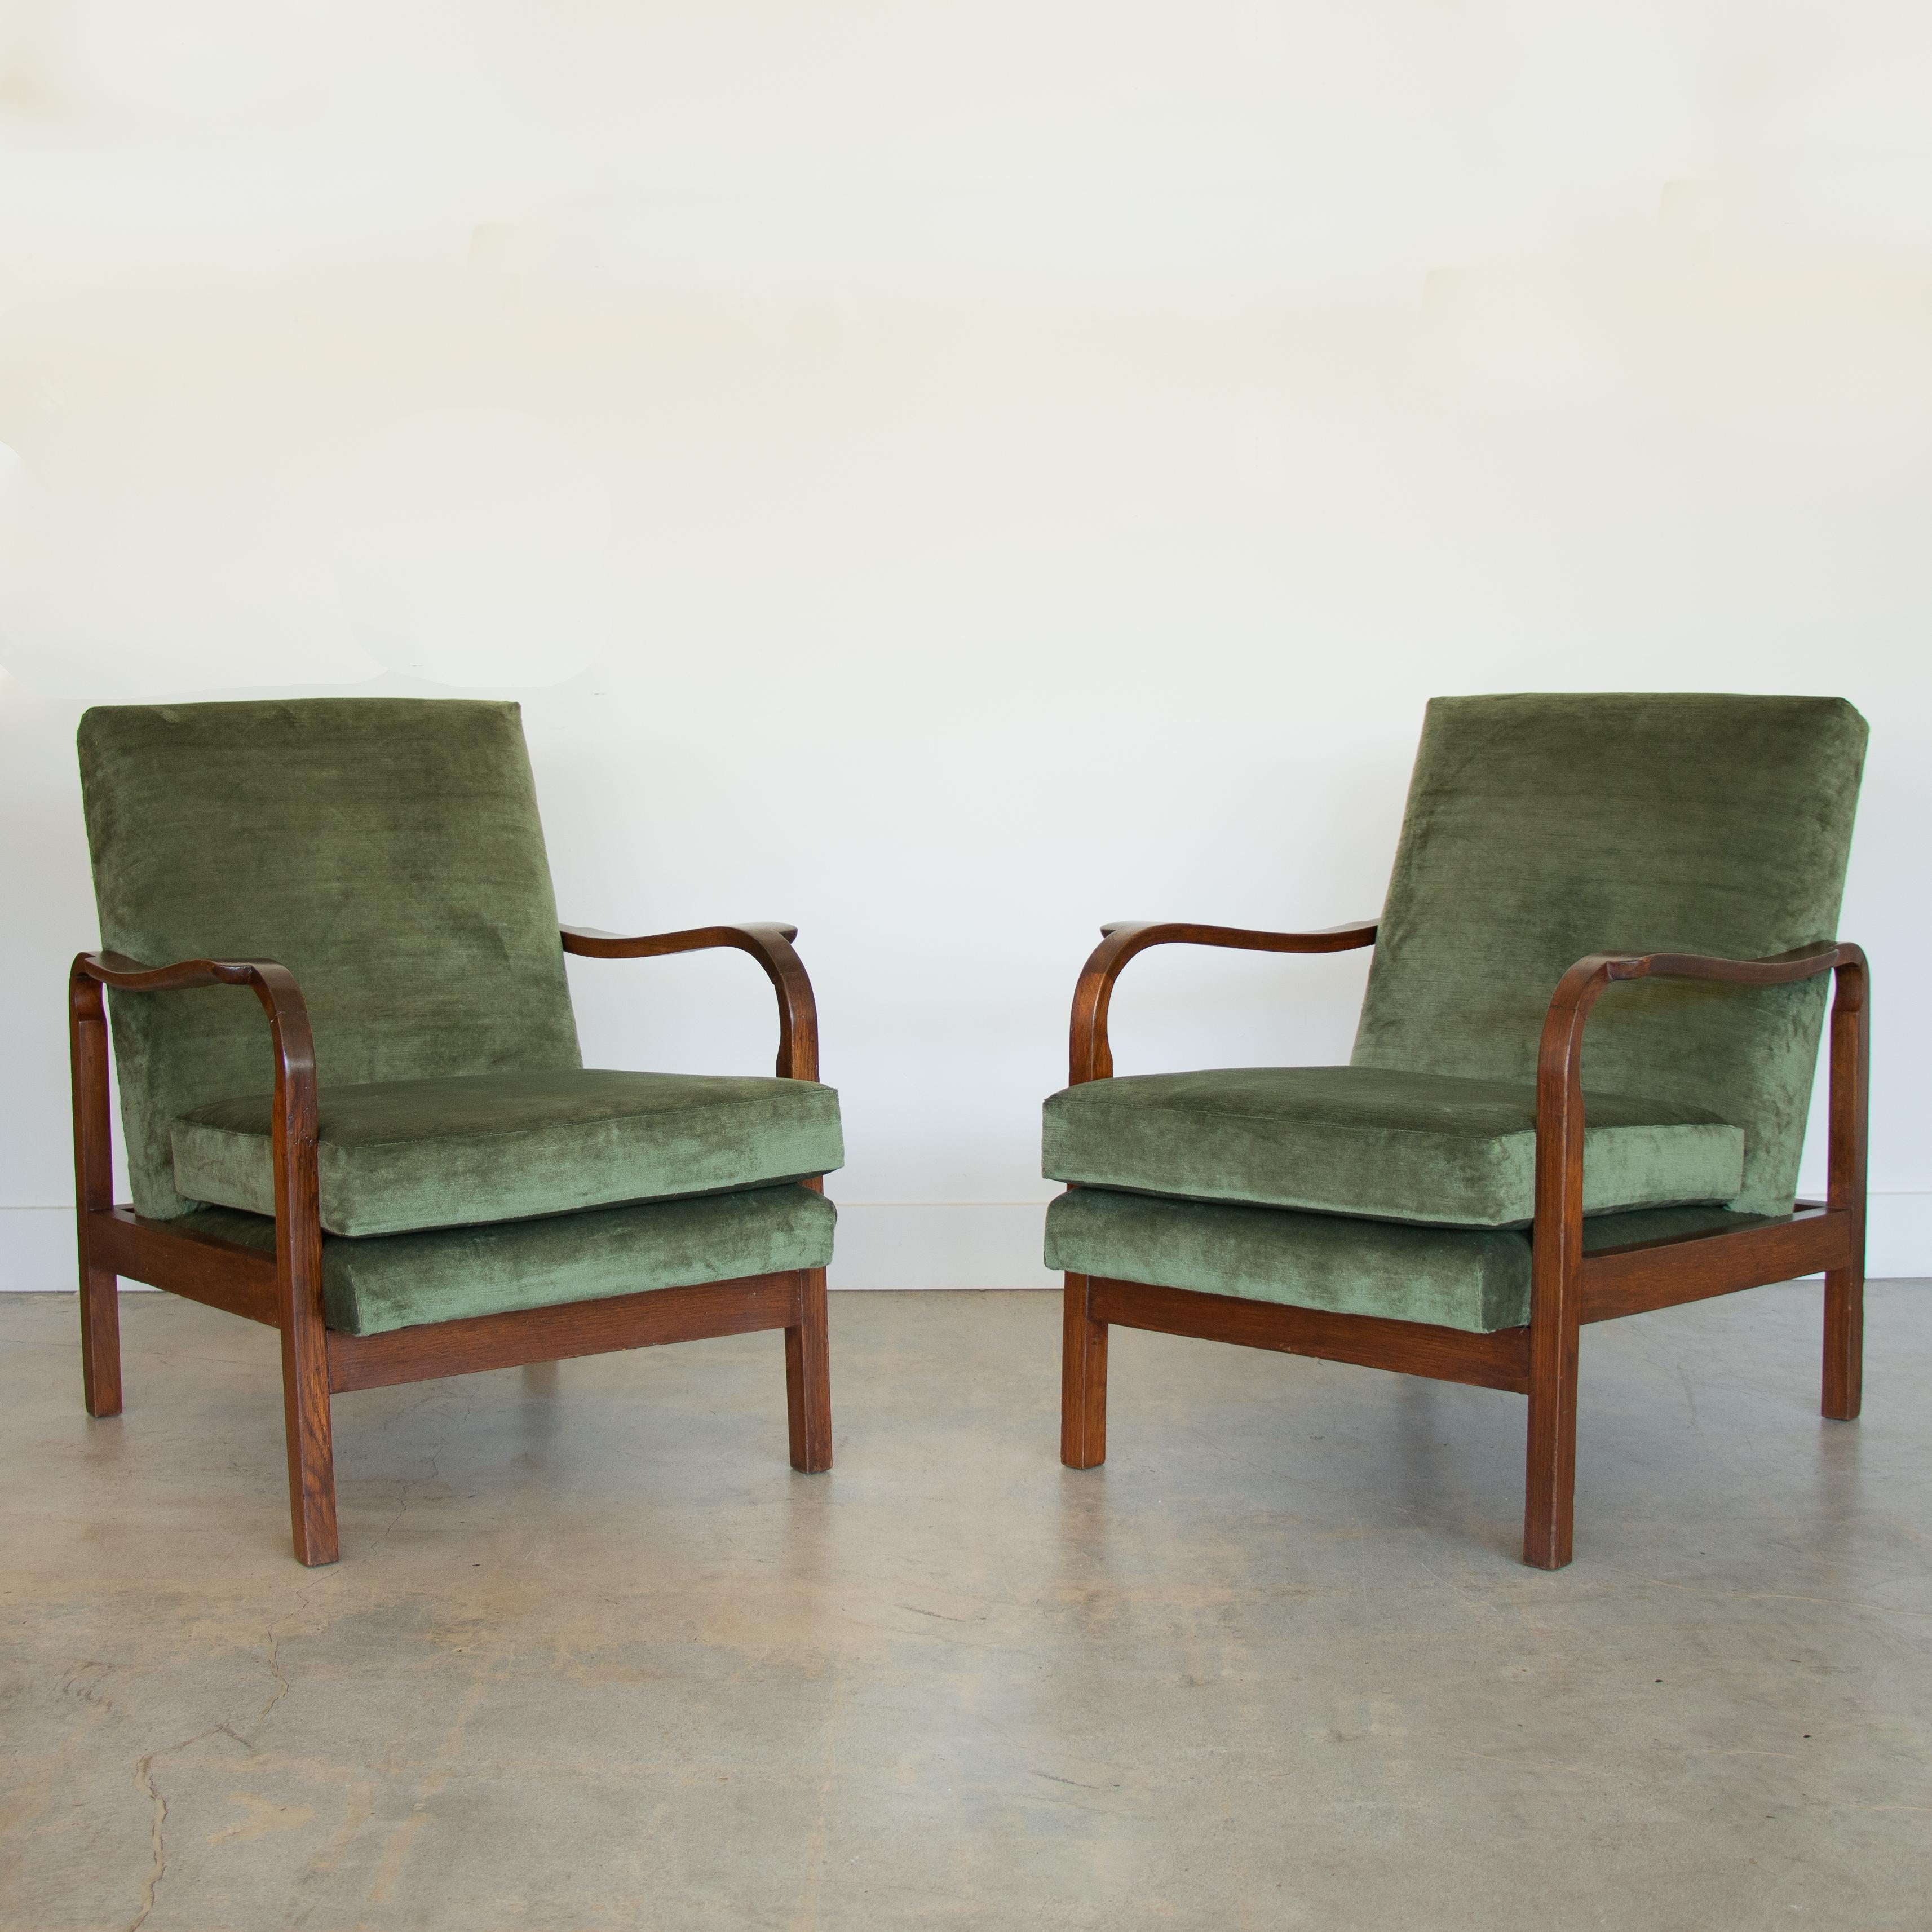 Stunning pair of carved wood armchairs from Italy, 1940's. Beautiful carved wood arms and wood frame with original dark stain showing grain. Original finish shows great age and patina. Newly upholstered seat and back cushions in soft emerald green